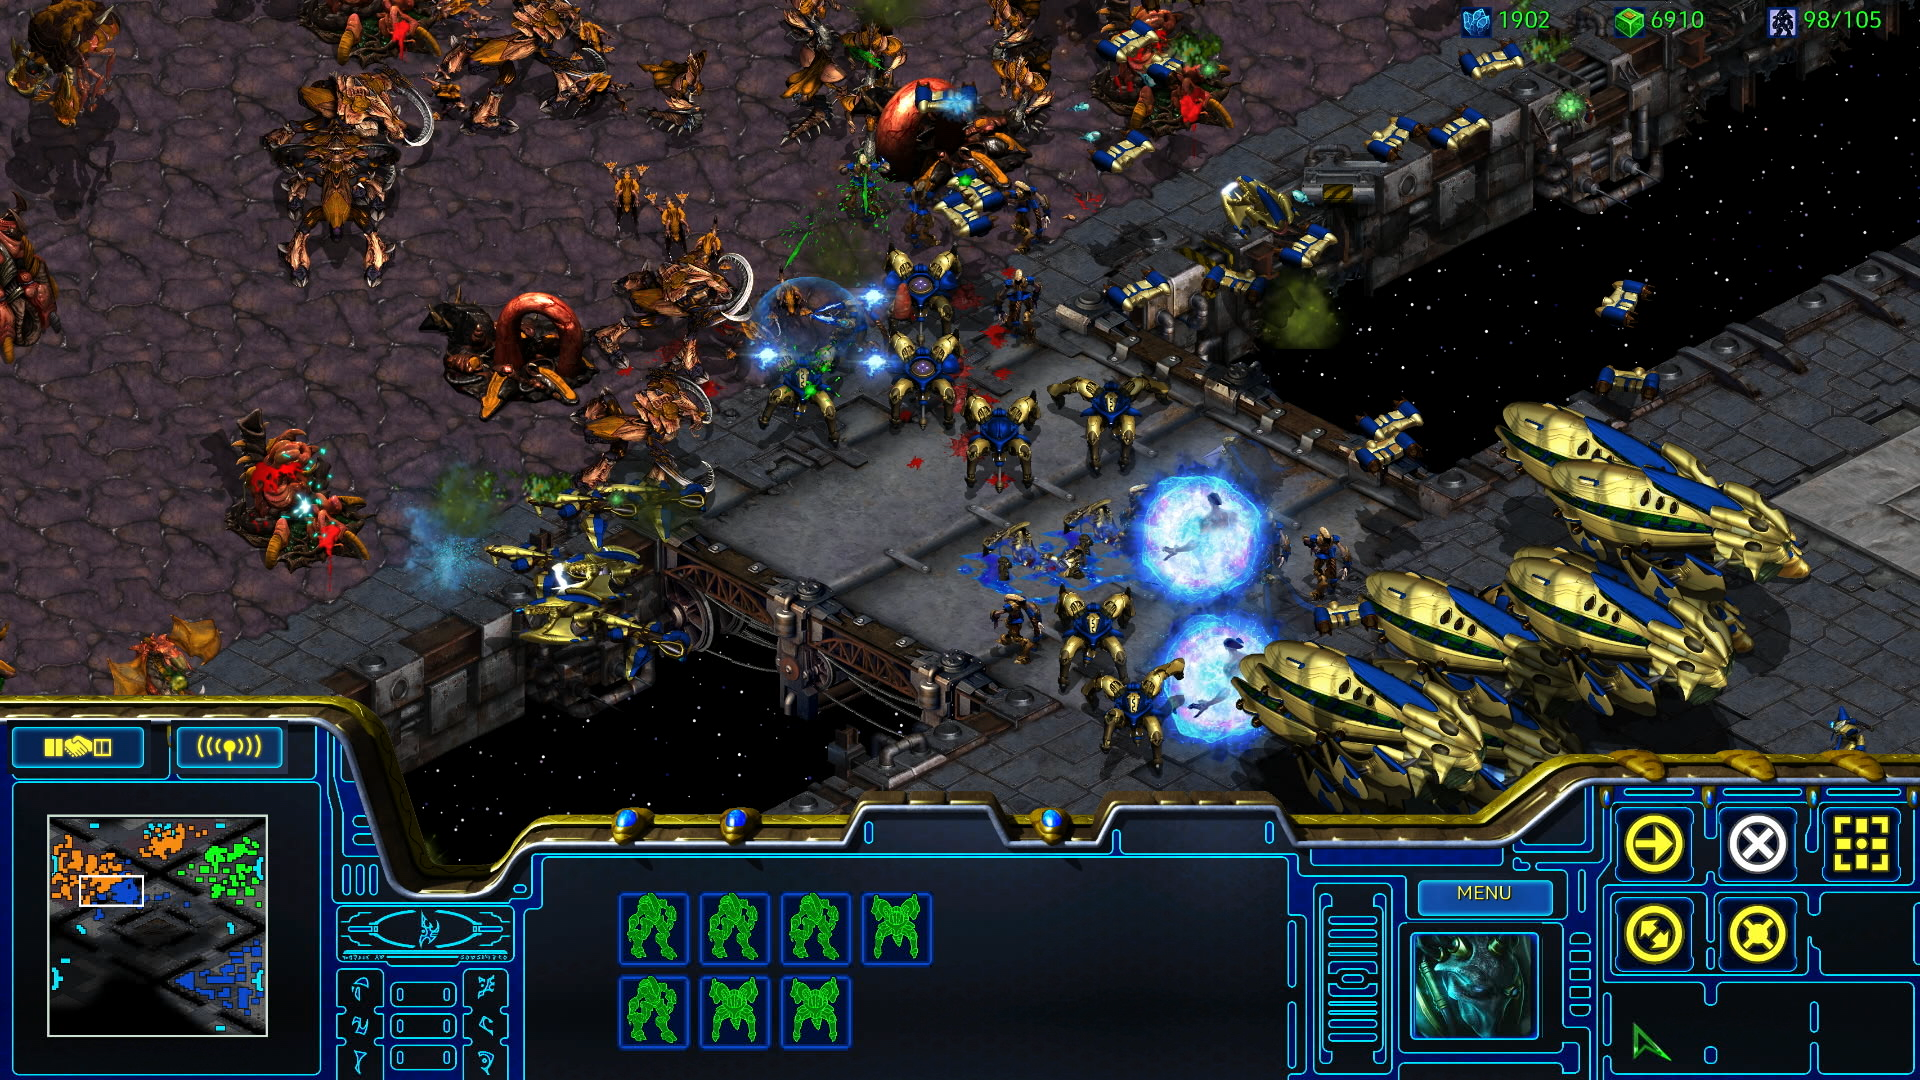 20 Years Later, StarCraft’s Story Is Still An Engrossing Take On Space Opera